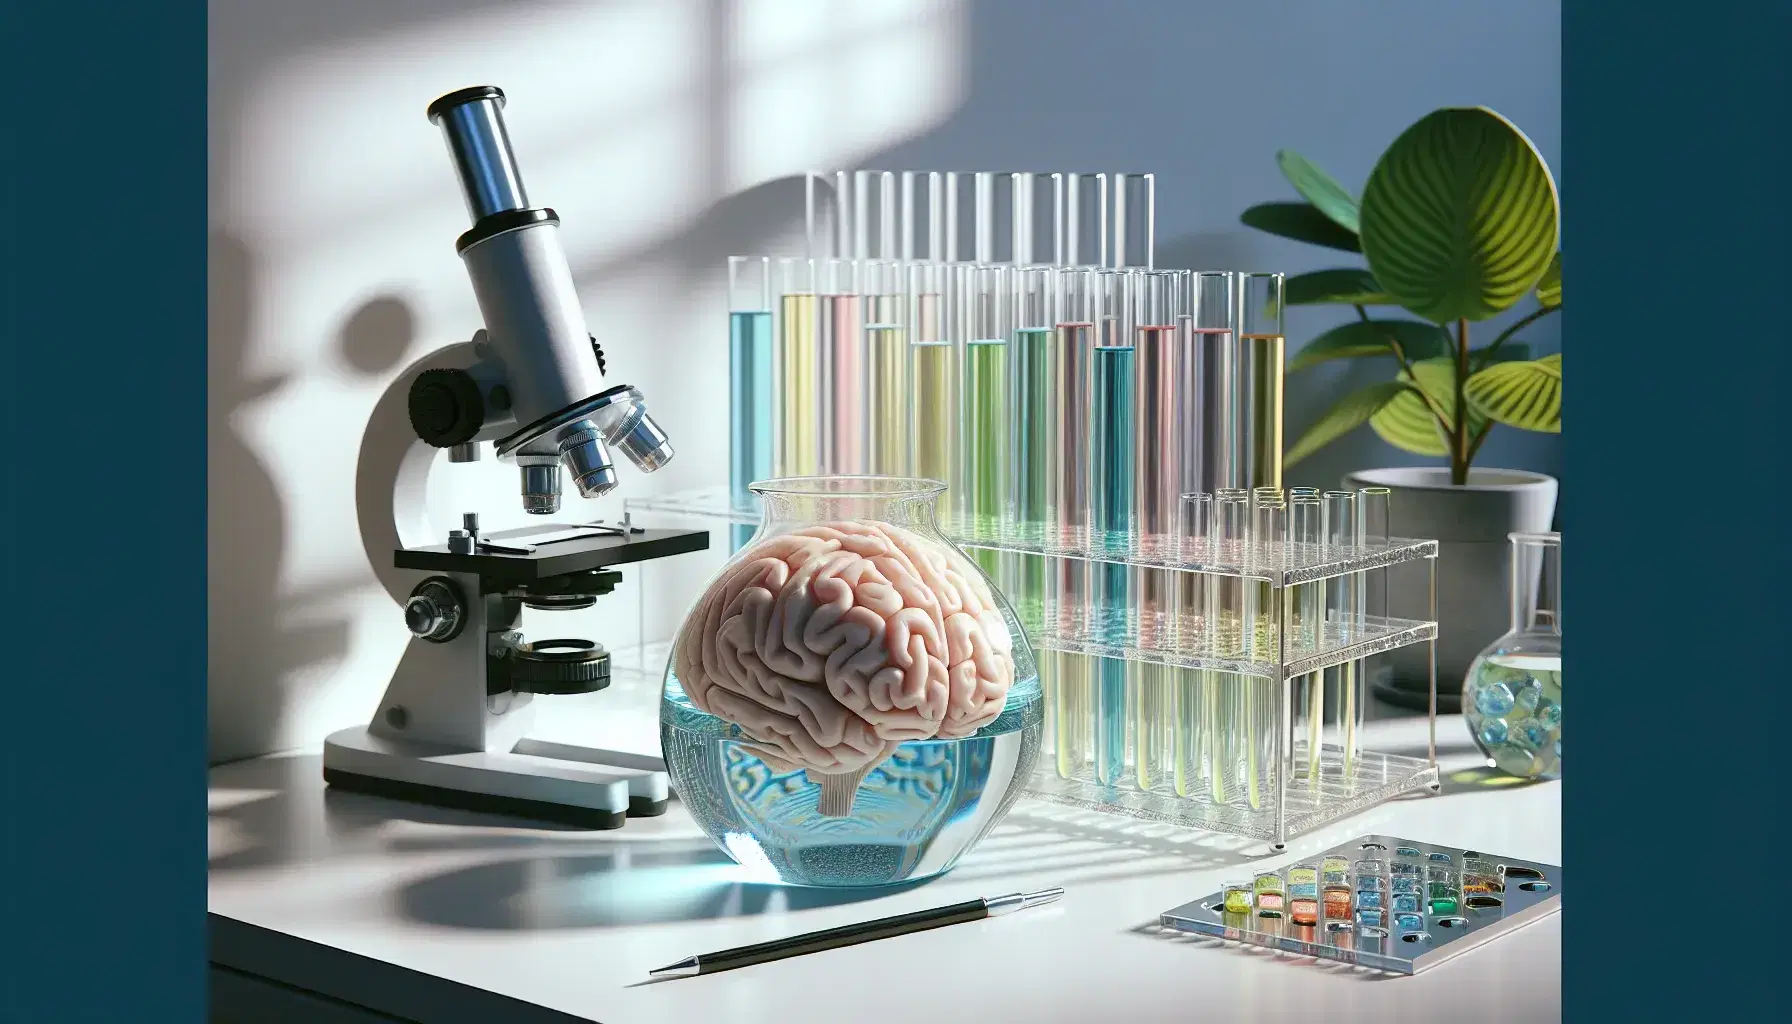 Laboratory organized with beaker of blue liquid, microscope, colored test tubes, human brain model and green plant.